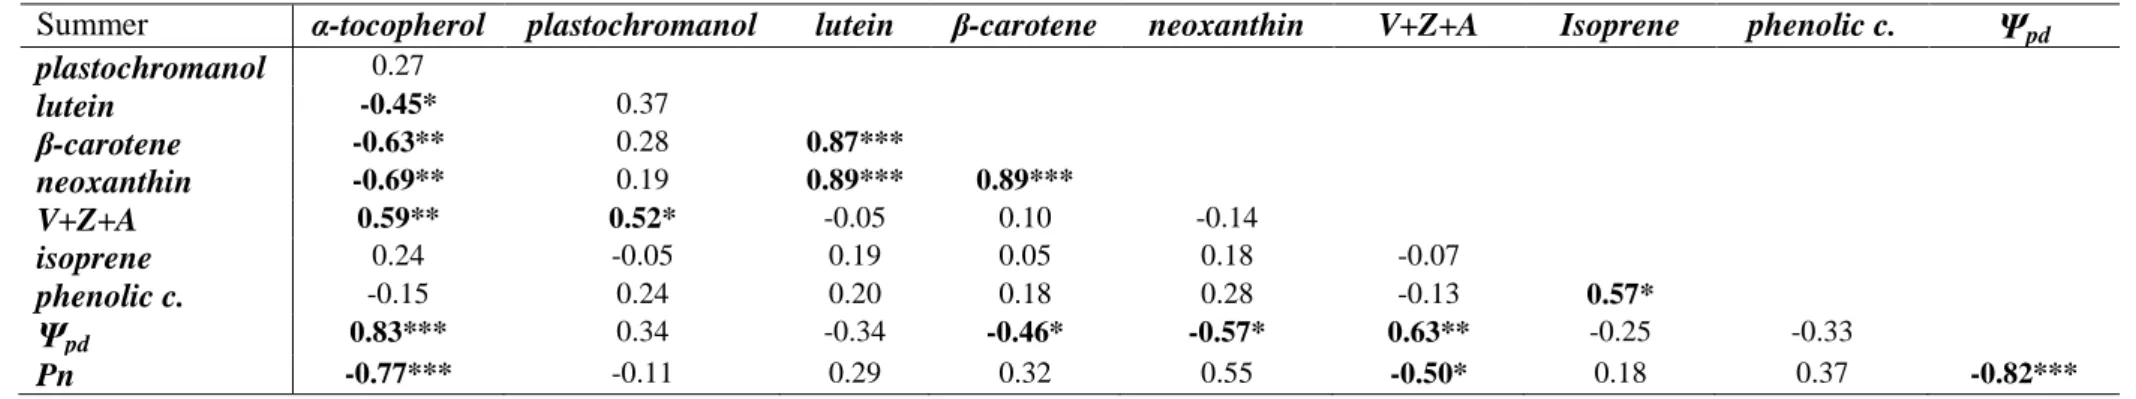 Table  3:  Spearman’s  coefficients  of  correlations  between  antioxidants  [α-tocopherol,  plastochromanol,  lutein,  β-carotene,  neoxanthin  and  xanthophyll cycle (violaxanthin+zeaxanthin+antheraxanthin , called V+Z+A )], isoprene, phenolic compounds